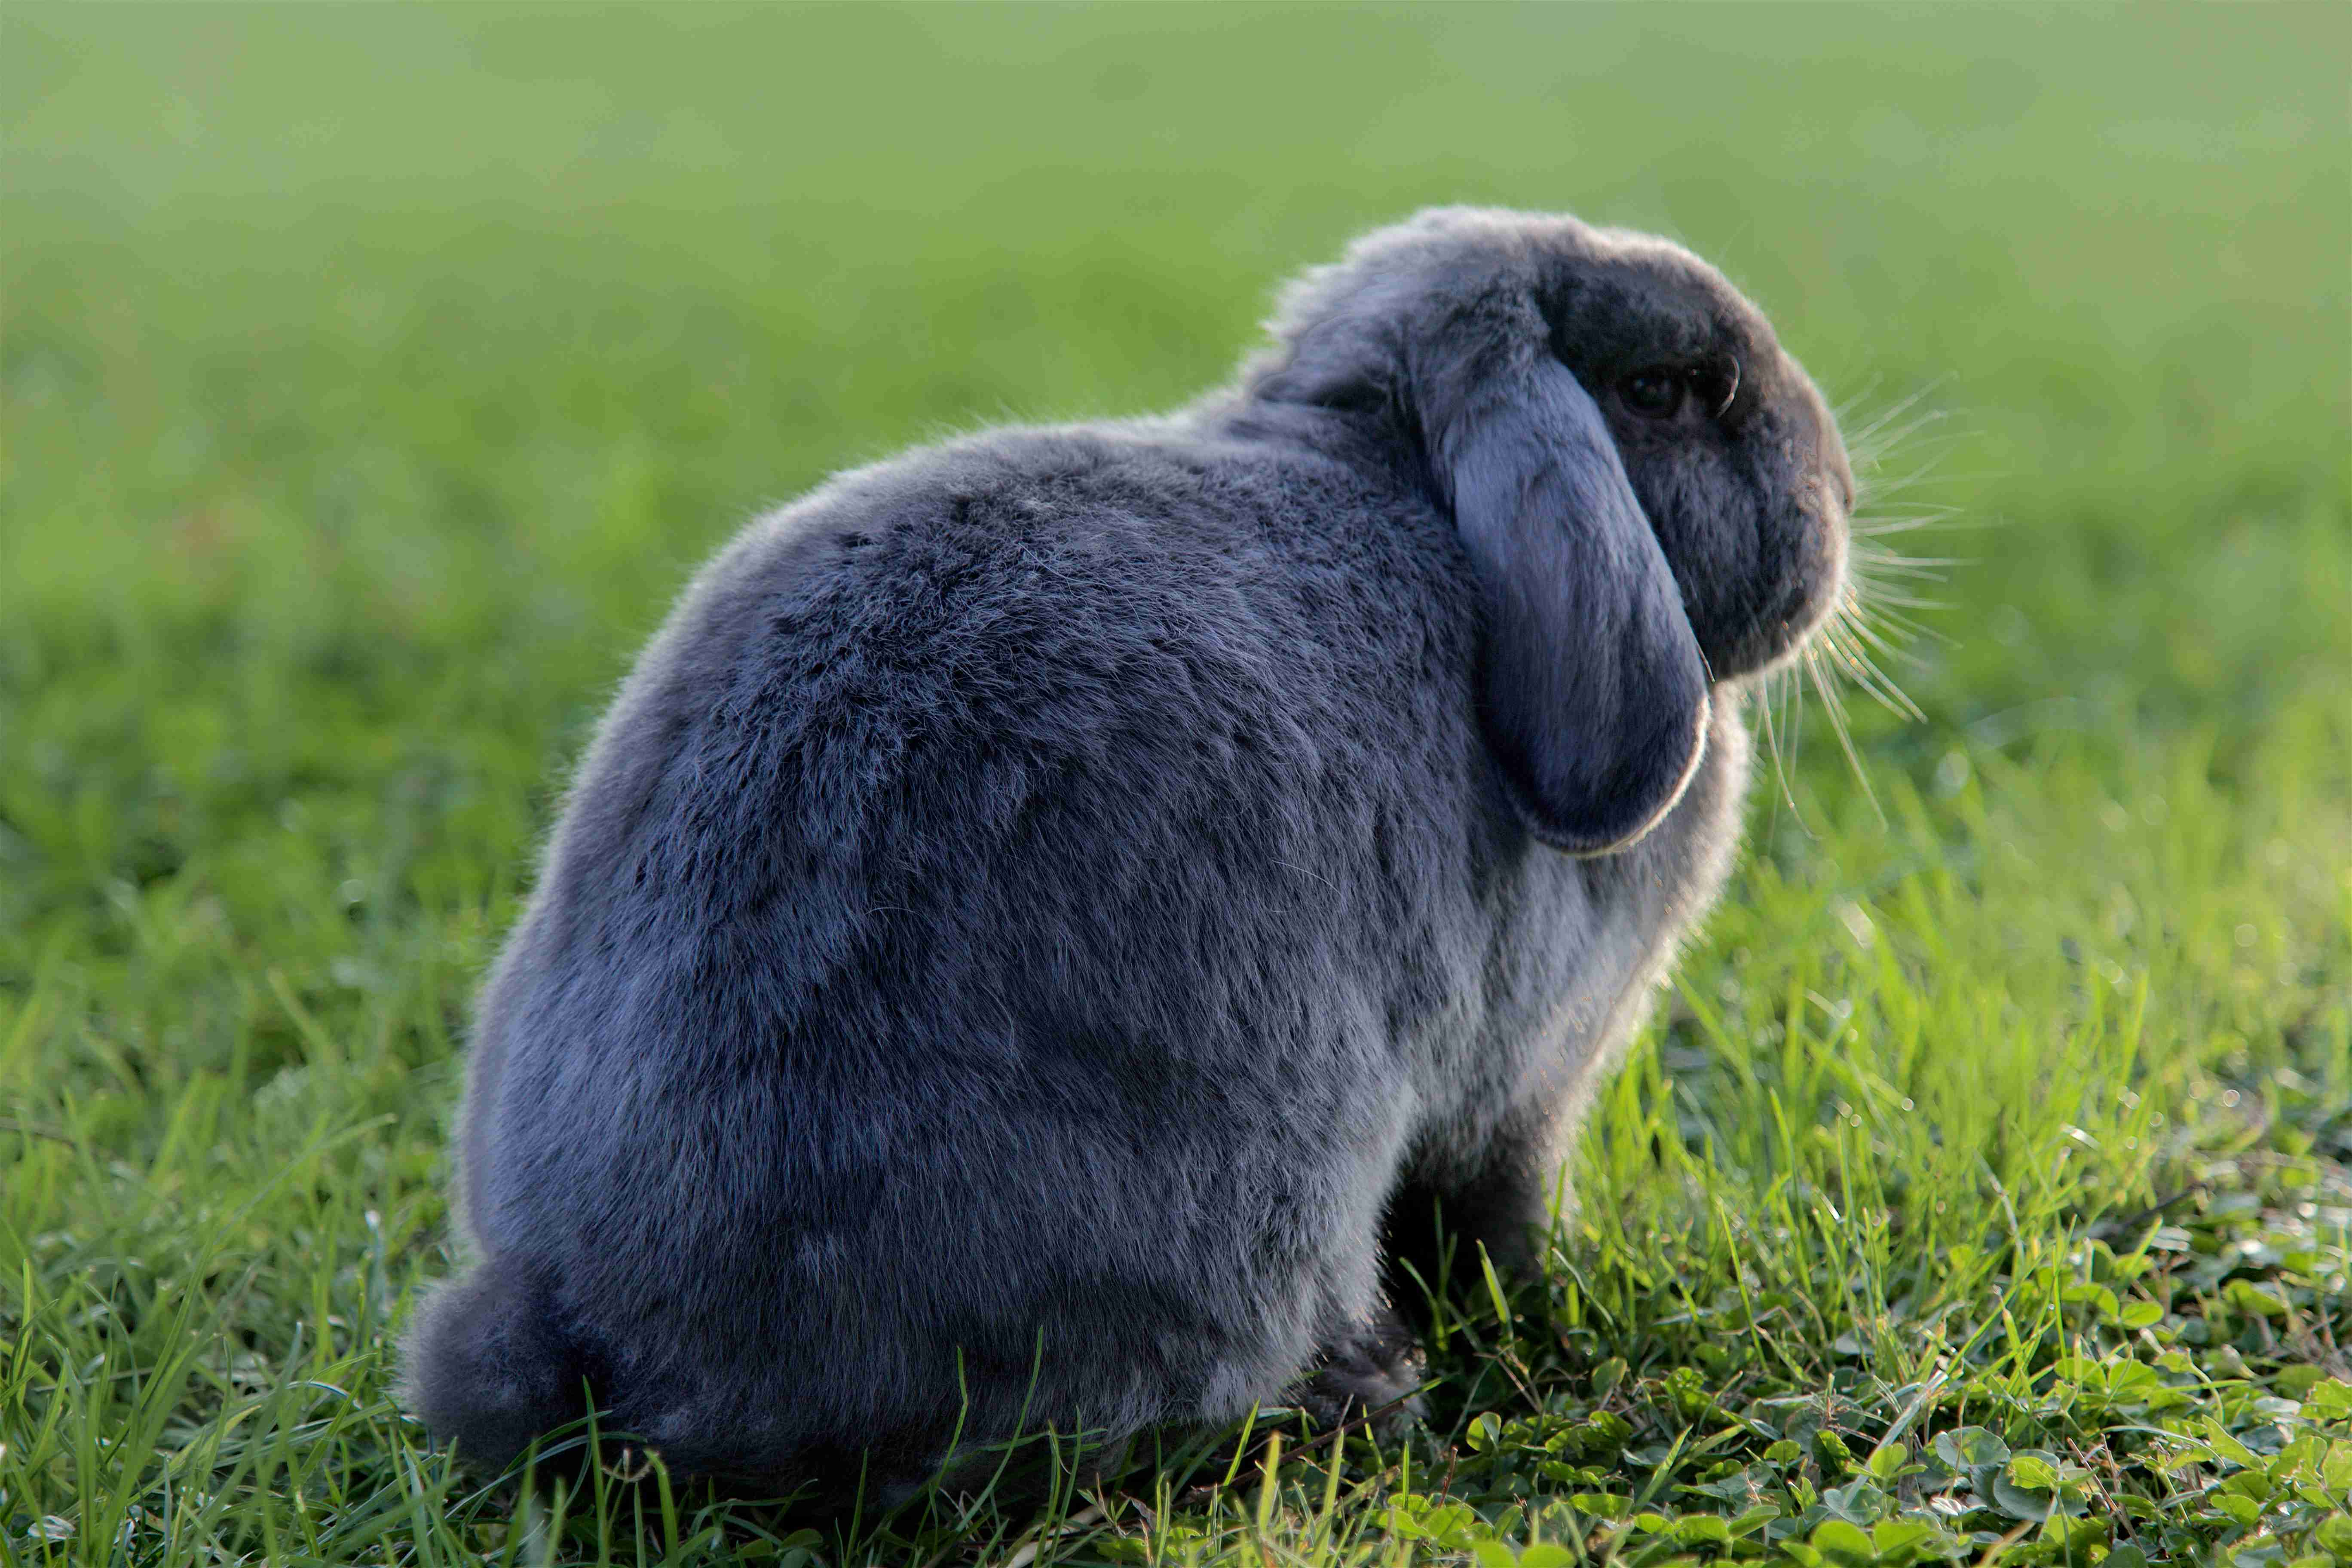 Identifying Urinary Tract Problems in Rabbits: Common Symptoms and Warning Signs